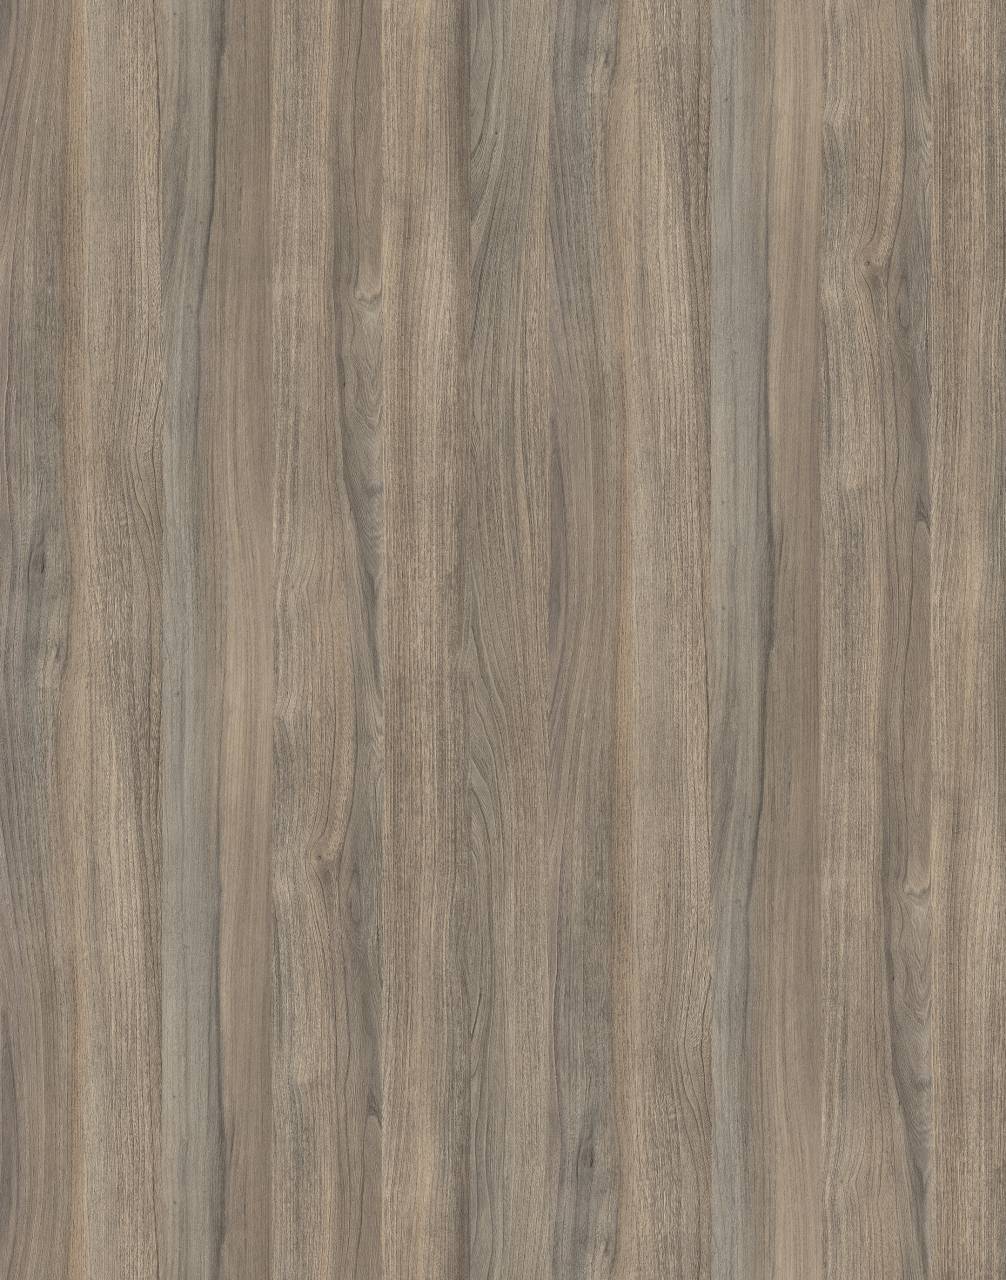 Smoked Liberty Elm PW HPL with textured surface and warm medium brown tones for an inviting and natural look.